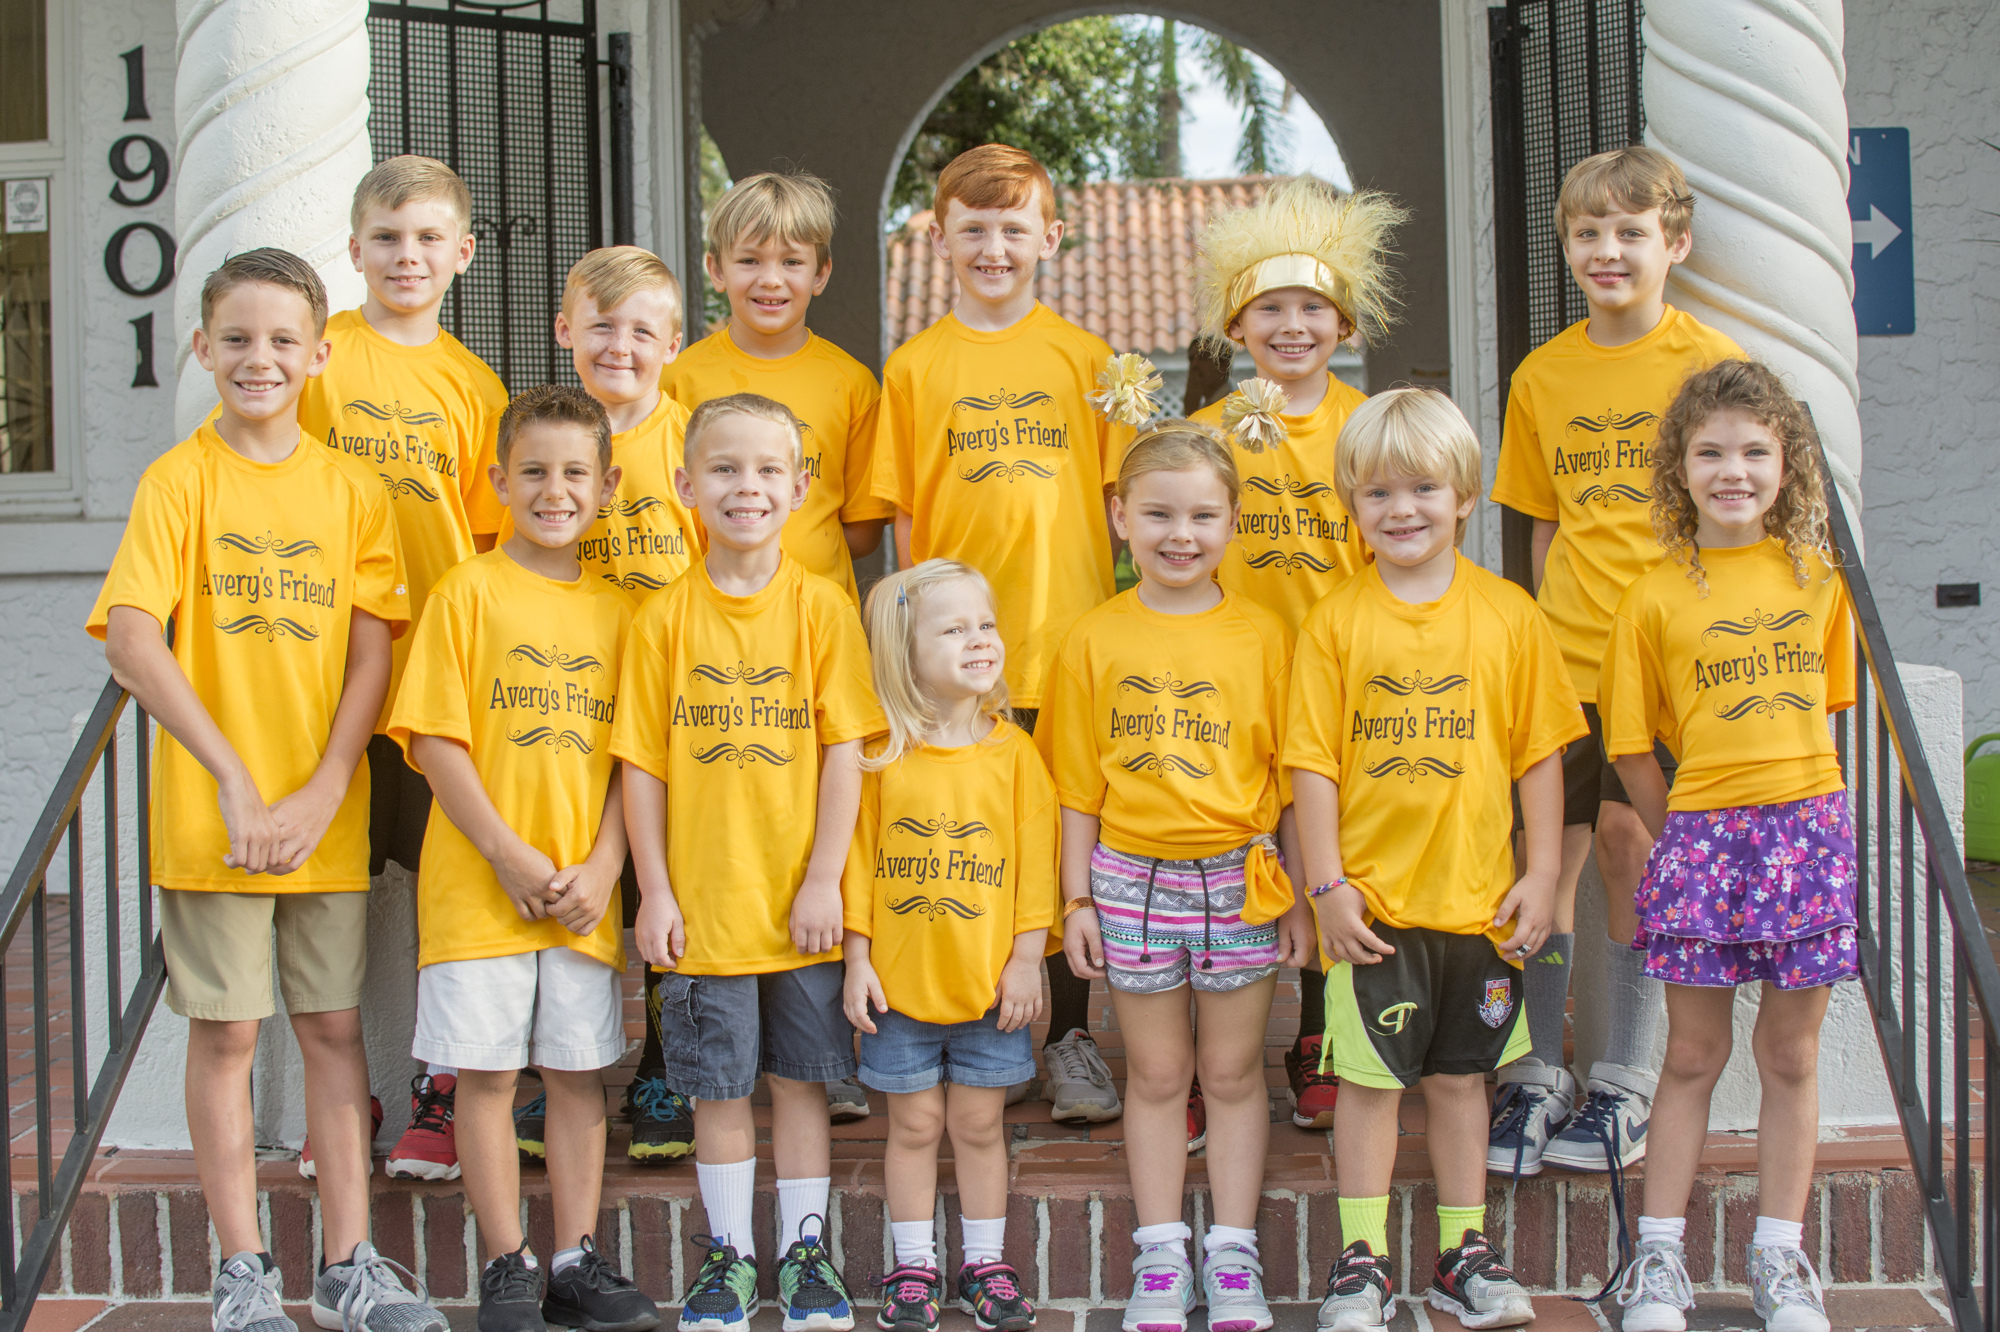 Children from the Southgate neighborhood pose with their matching shirts in honor of fellow student Avery Rann.